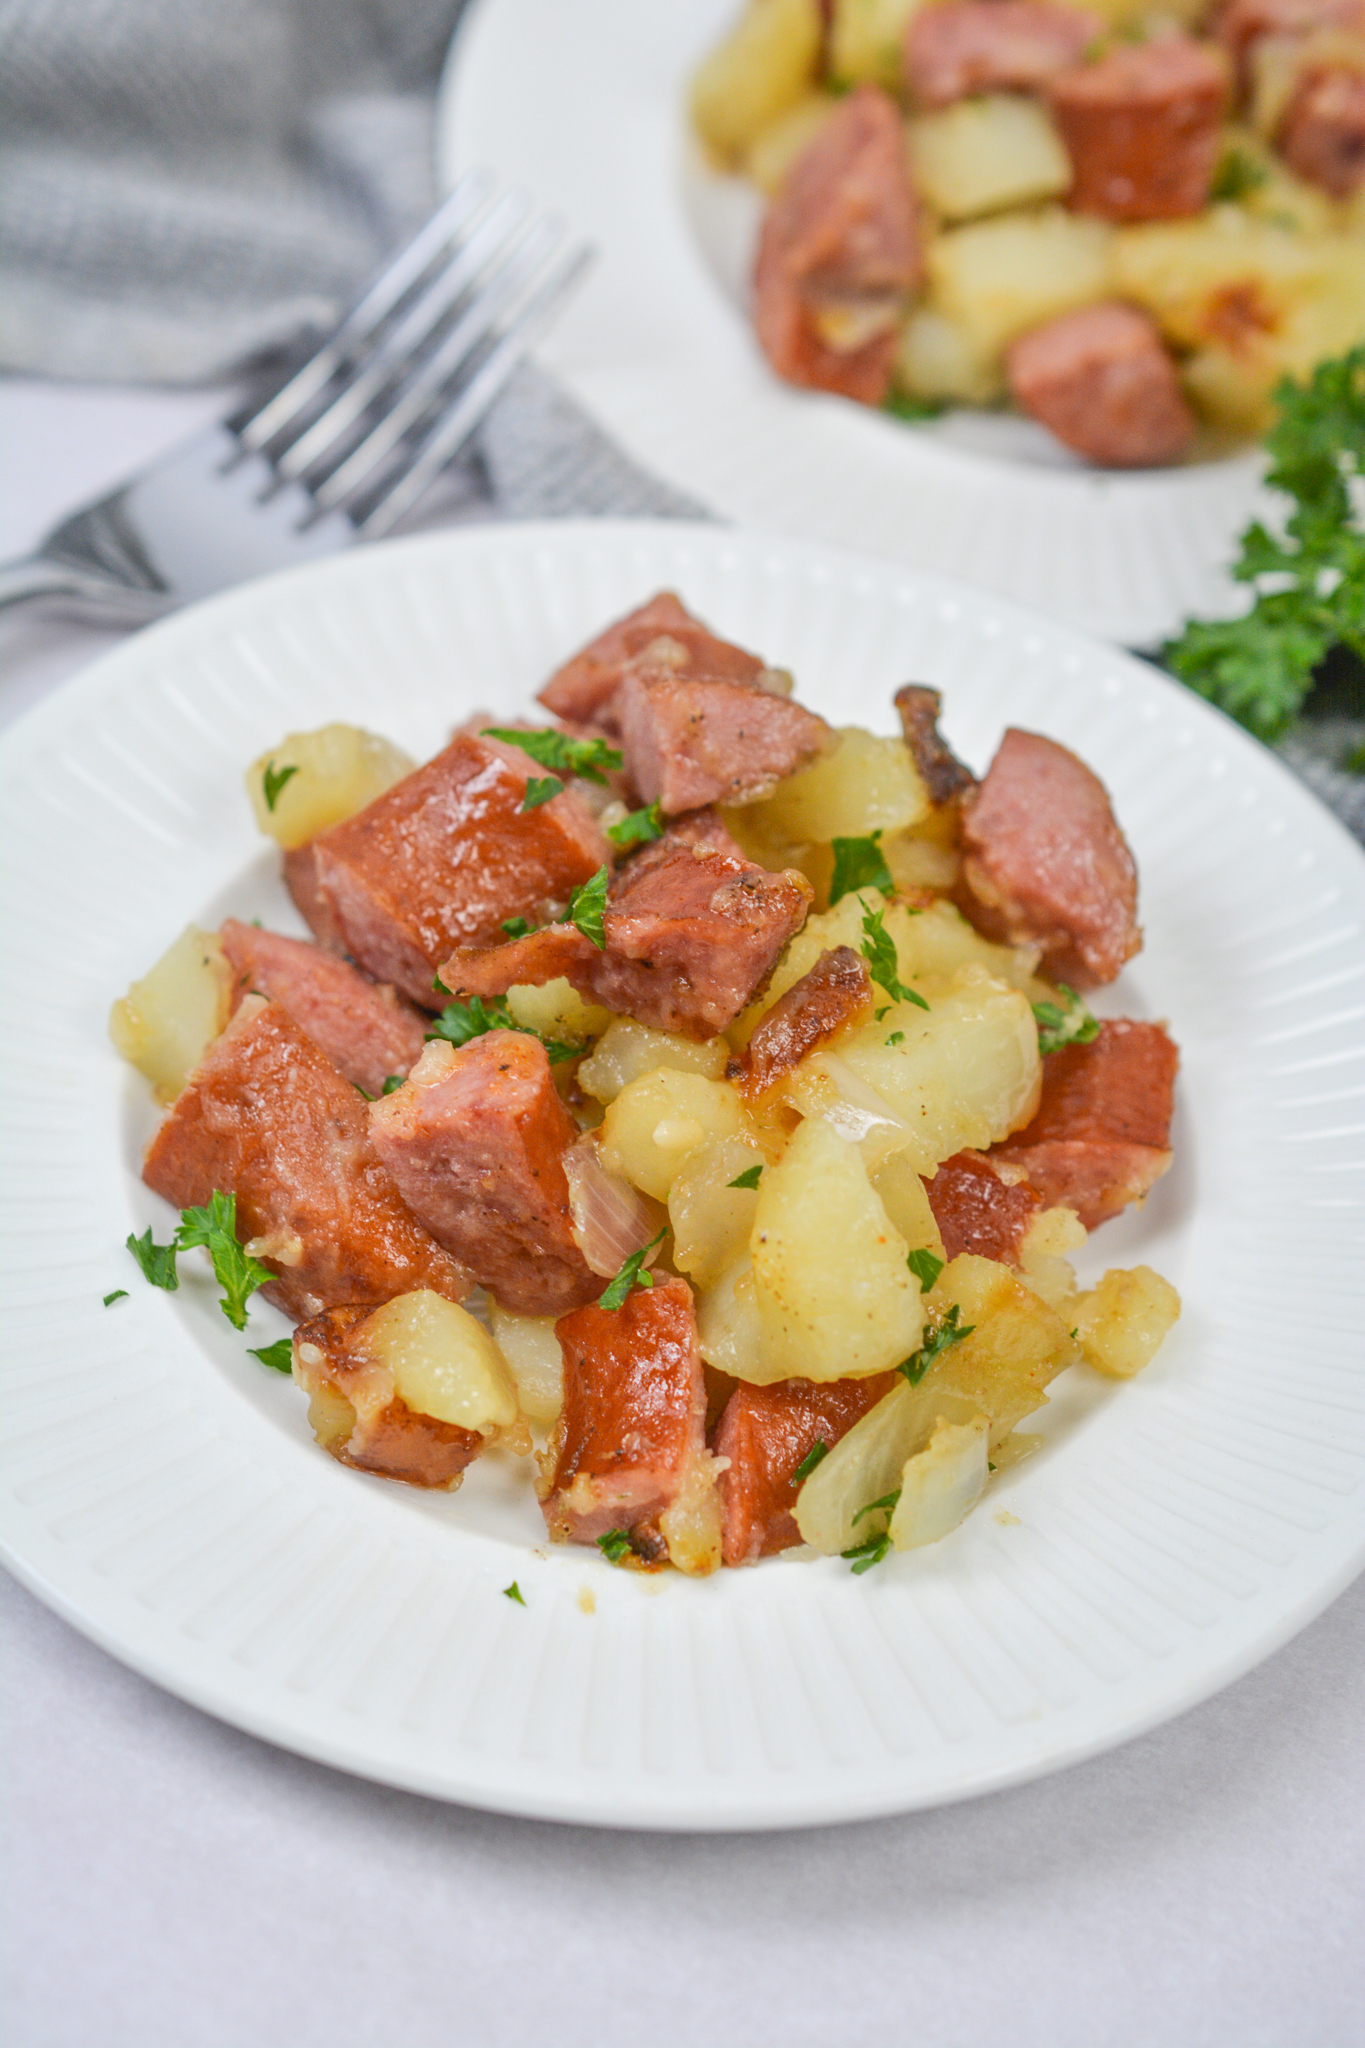 Southern fried potatoes and sausage